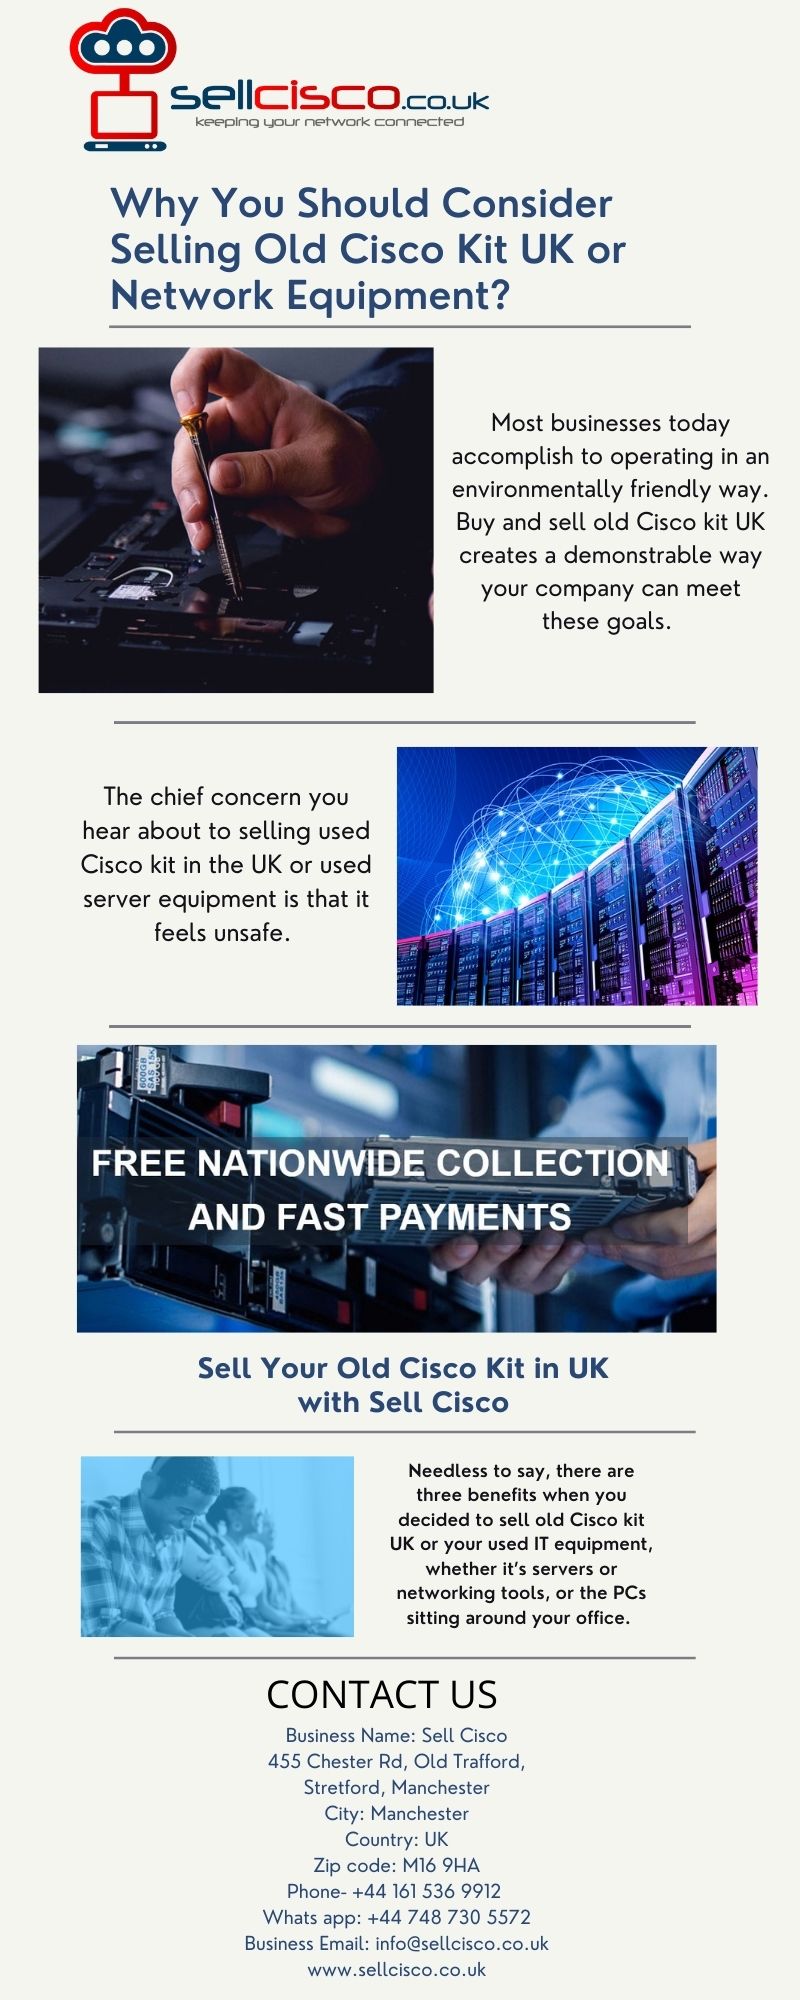 Why You Should Consider Selling Old Cisco Kit UK or Network Equipment.jpg  by Sellcisco